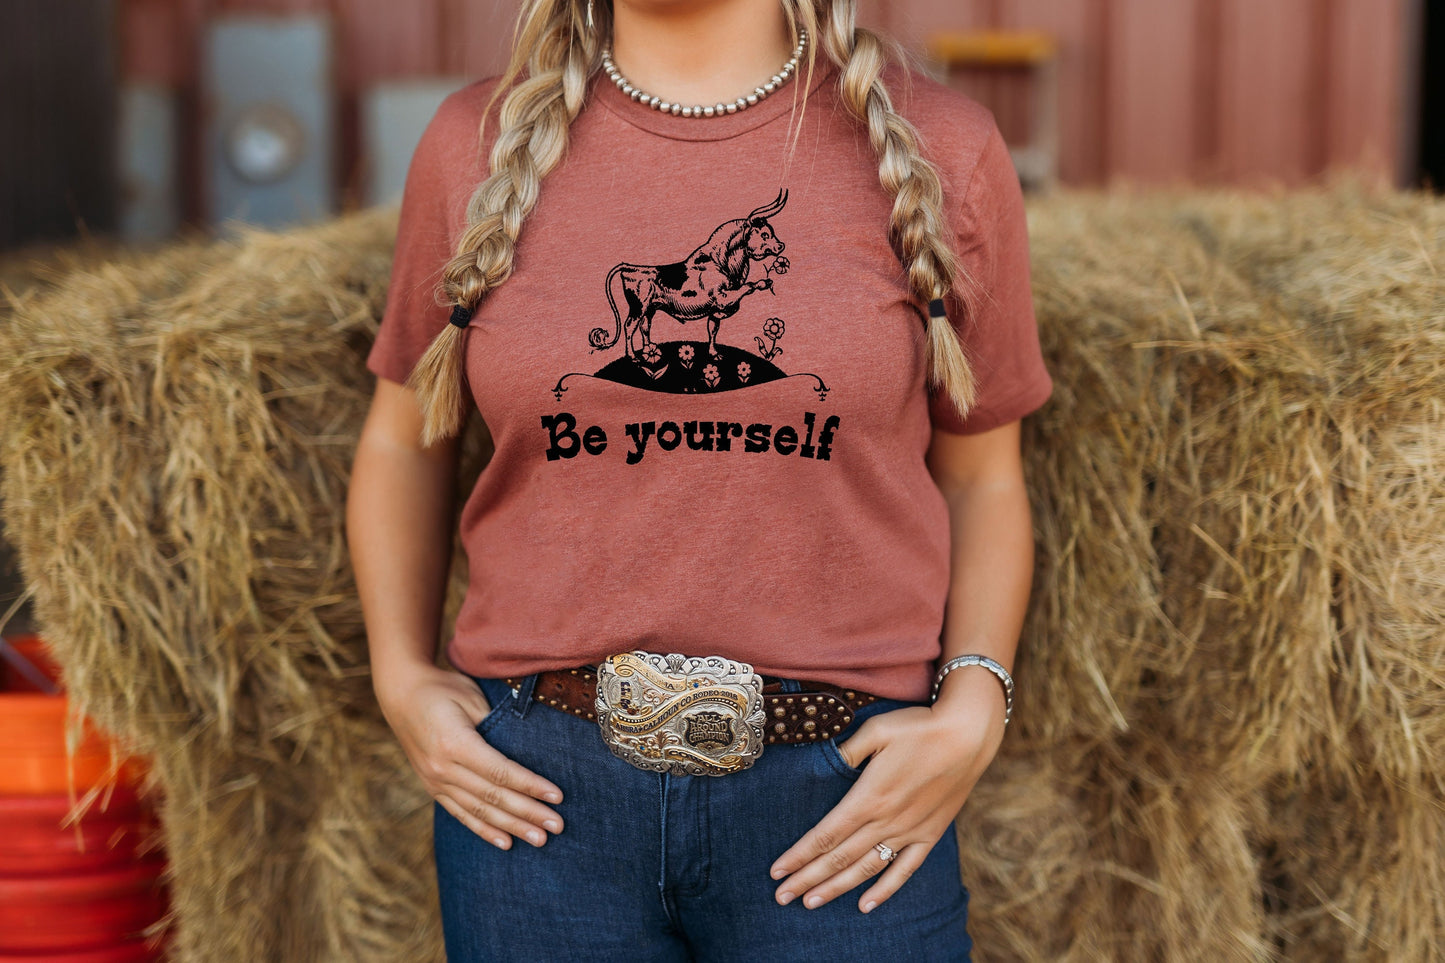 Be Yourself Bull Ferdinand Vintage Story Book Character Ultra Soft Graphic Tee Unisex Soft Tee T-shirt for Women or Men